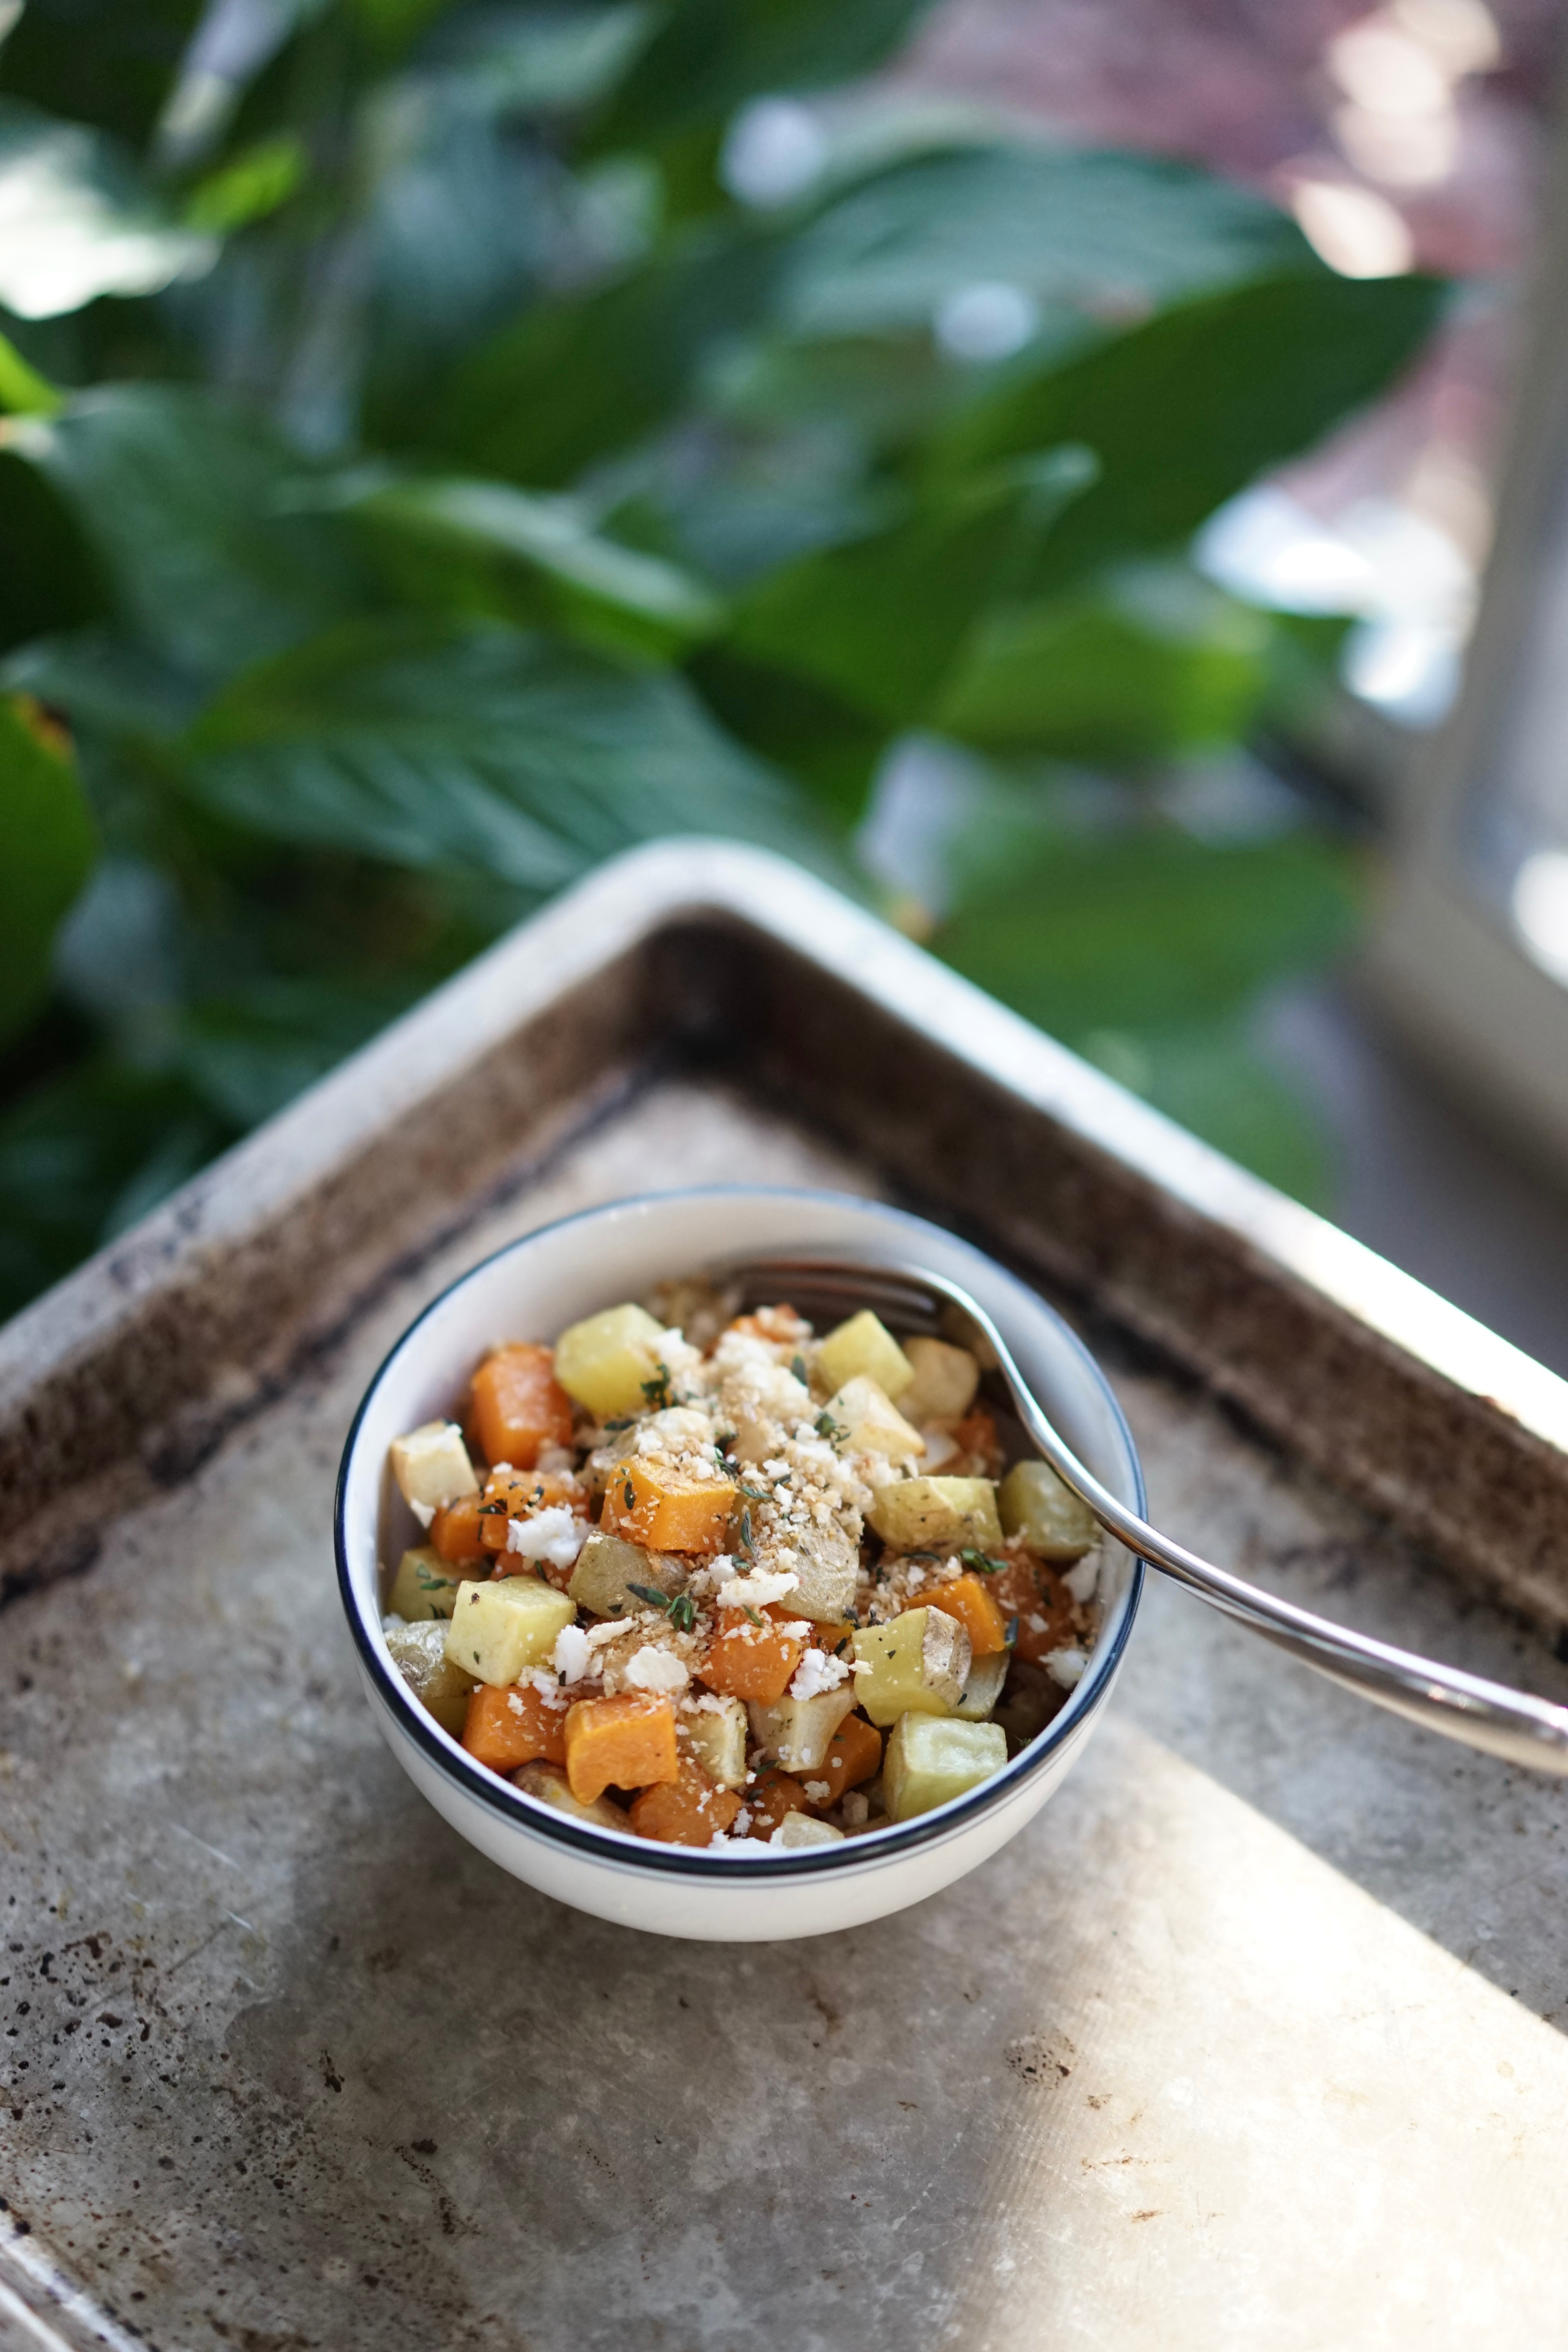 Lemony Roasted Butternut Squash, Potatoes & Apple with Breadcrumbs | Living Healthy in Seattle